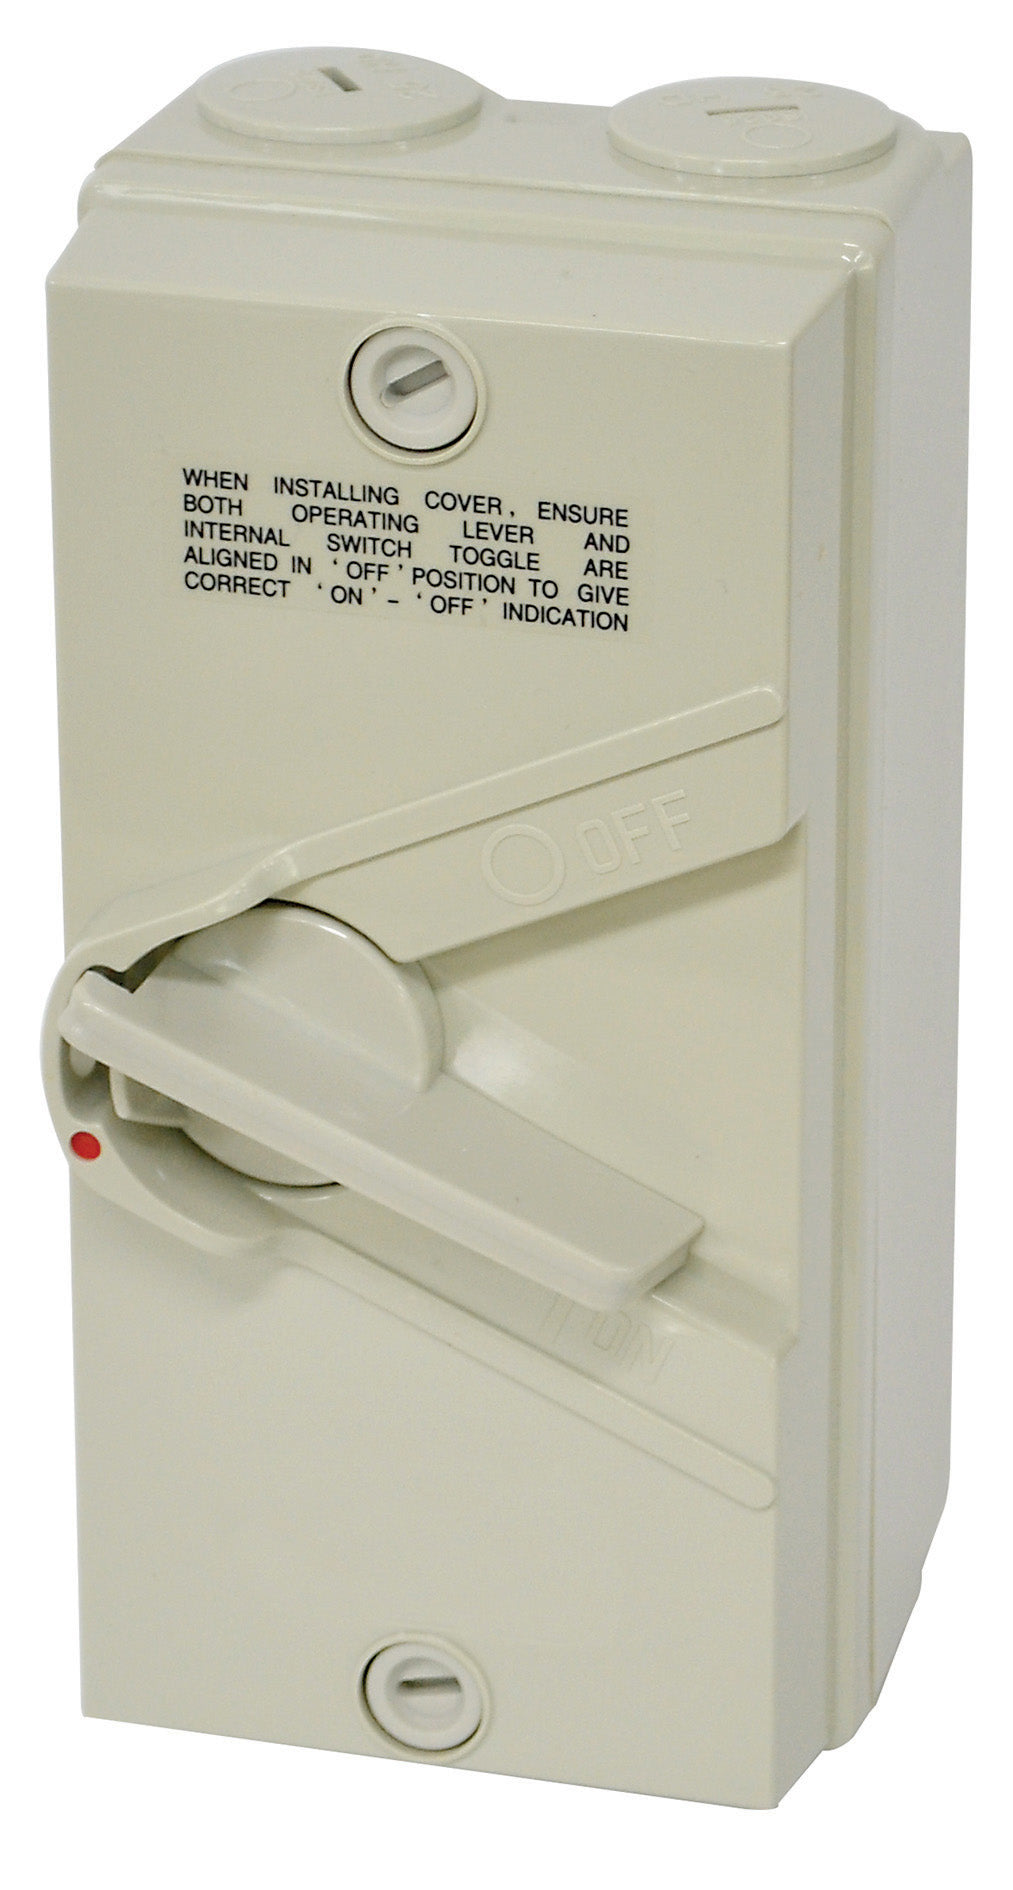 SINGLE POLE WEATHERPROOF ISOLATING SWITCH 250V 32A IP66 - IS132